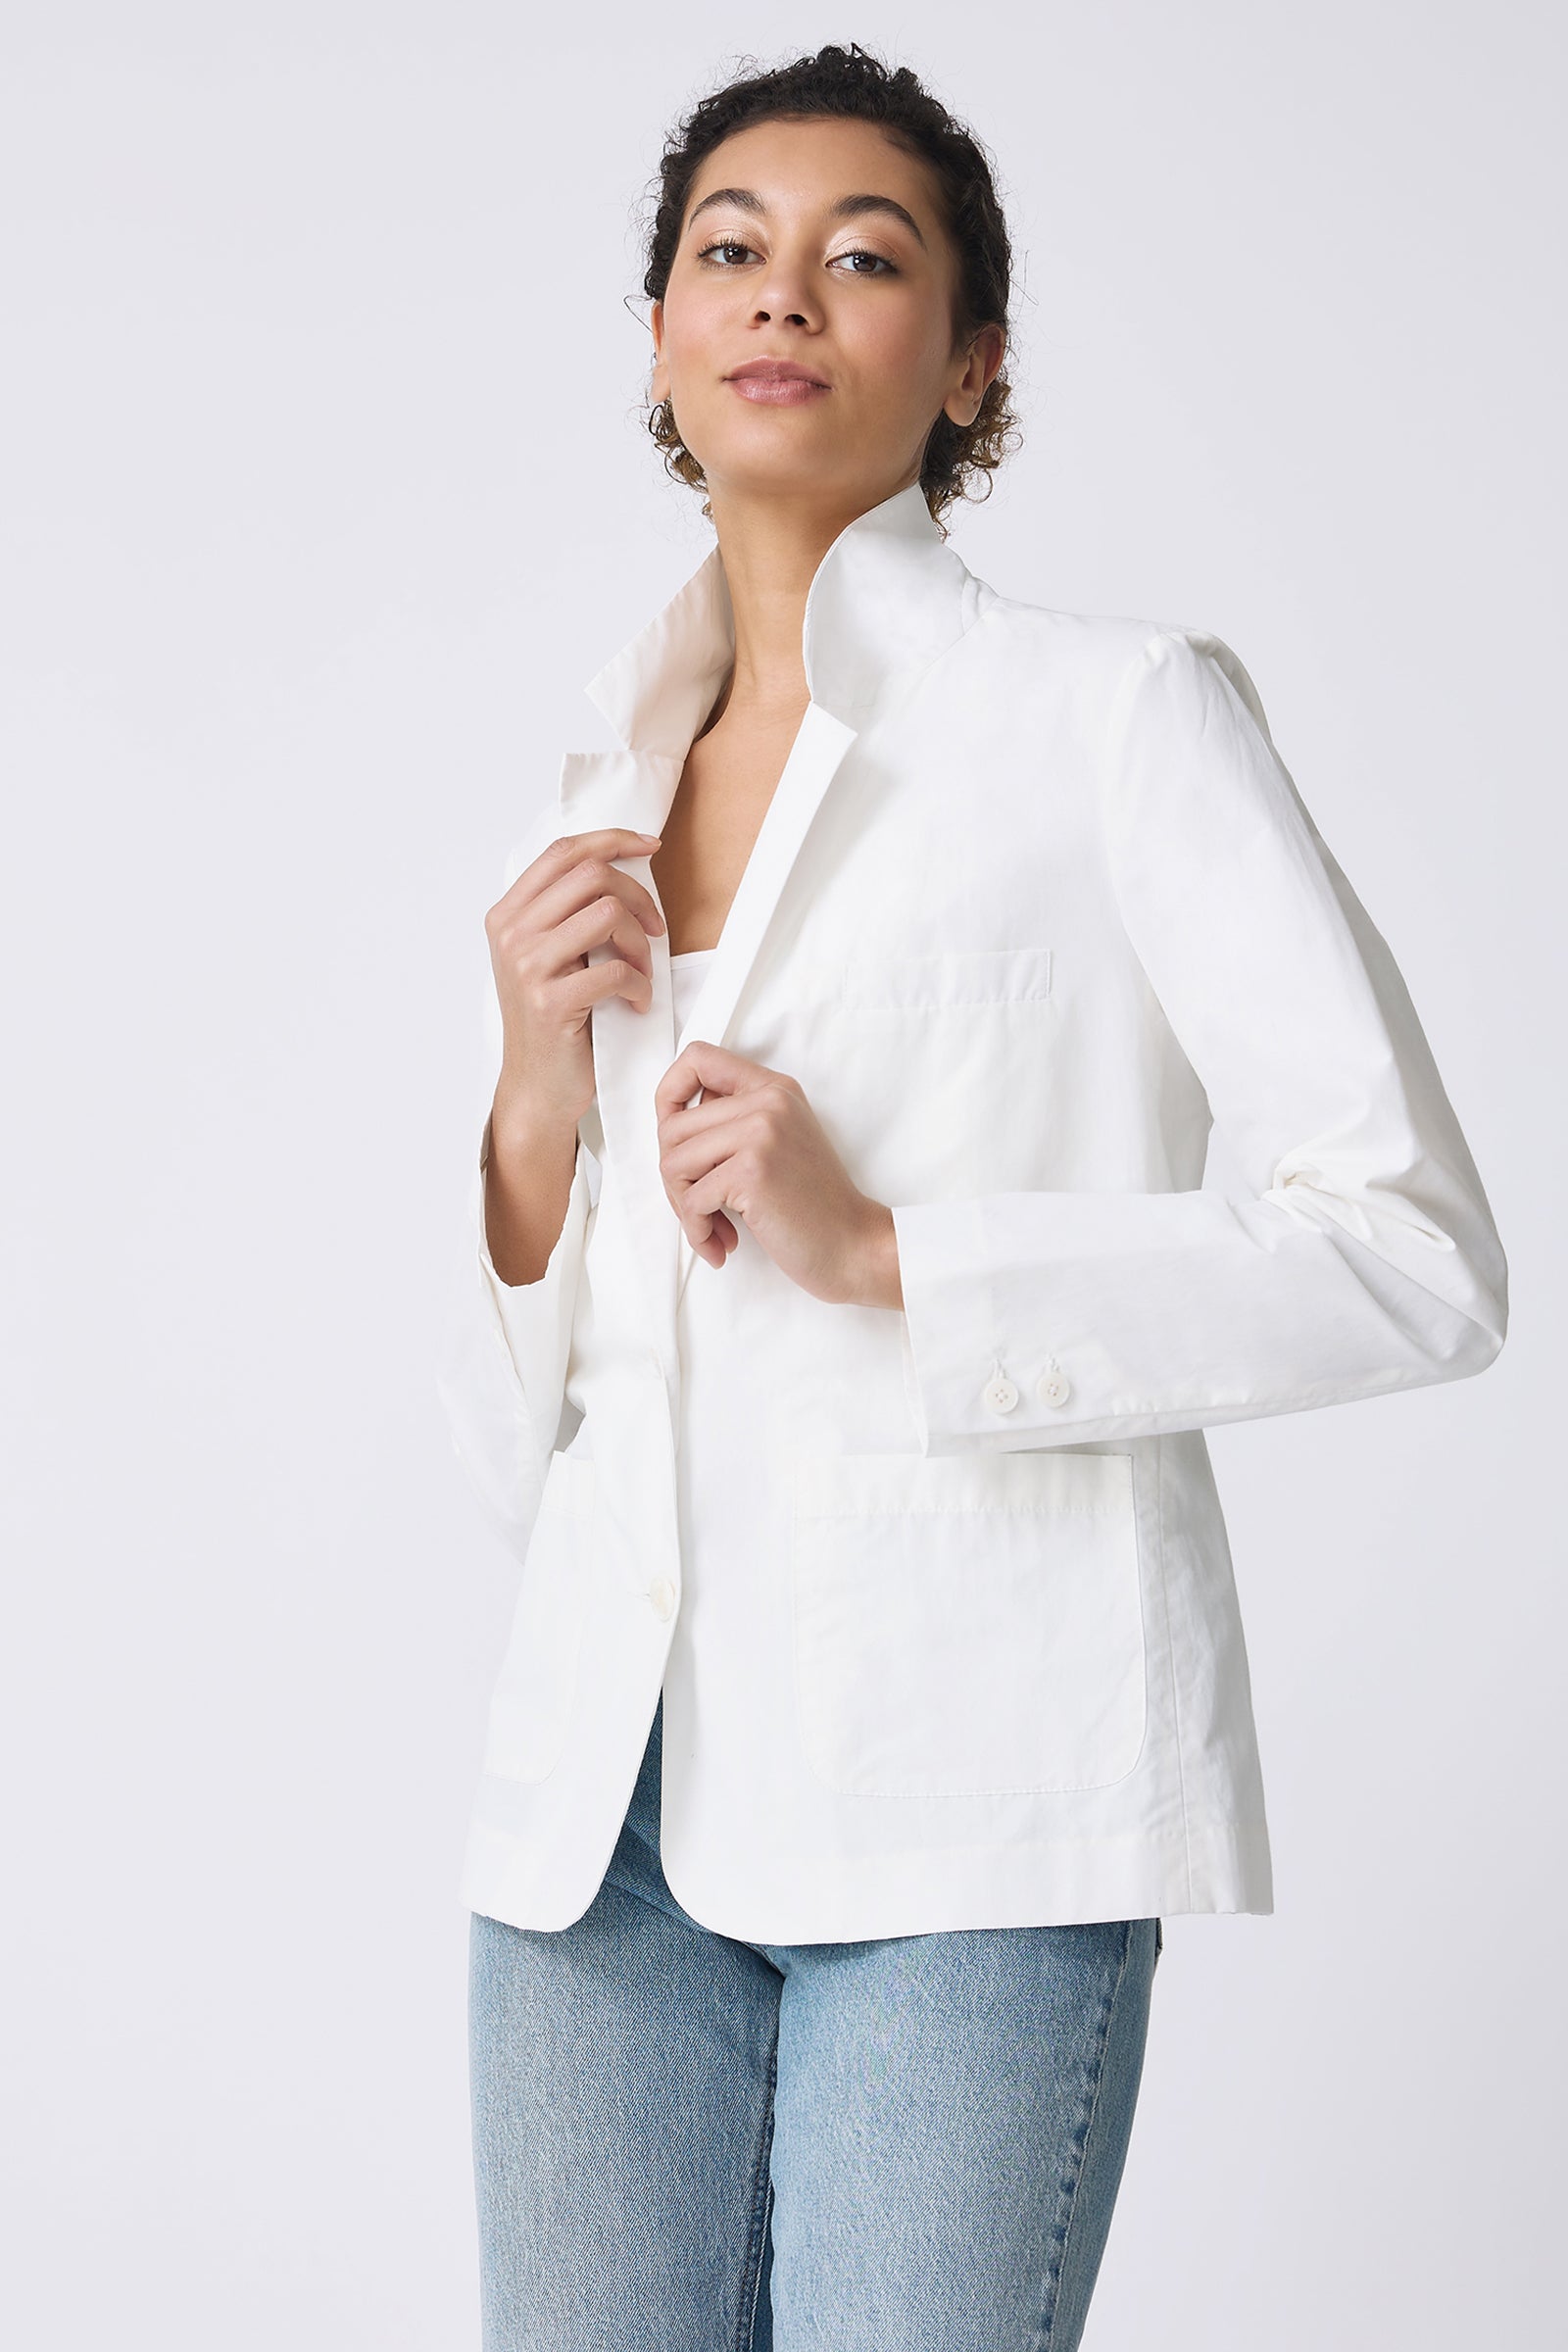 Kal Rieman Castel Patch Pocket Blazer in Ecru on model with chin up front view